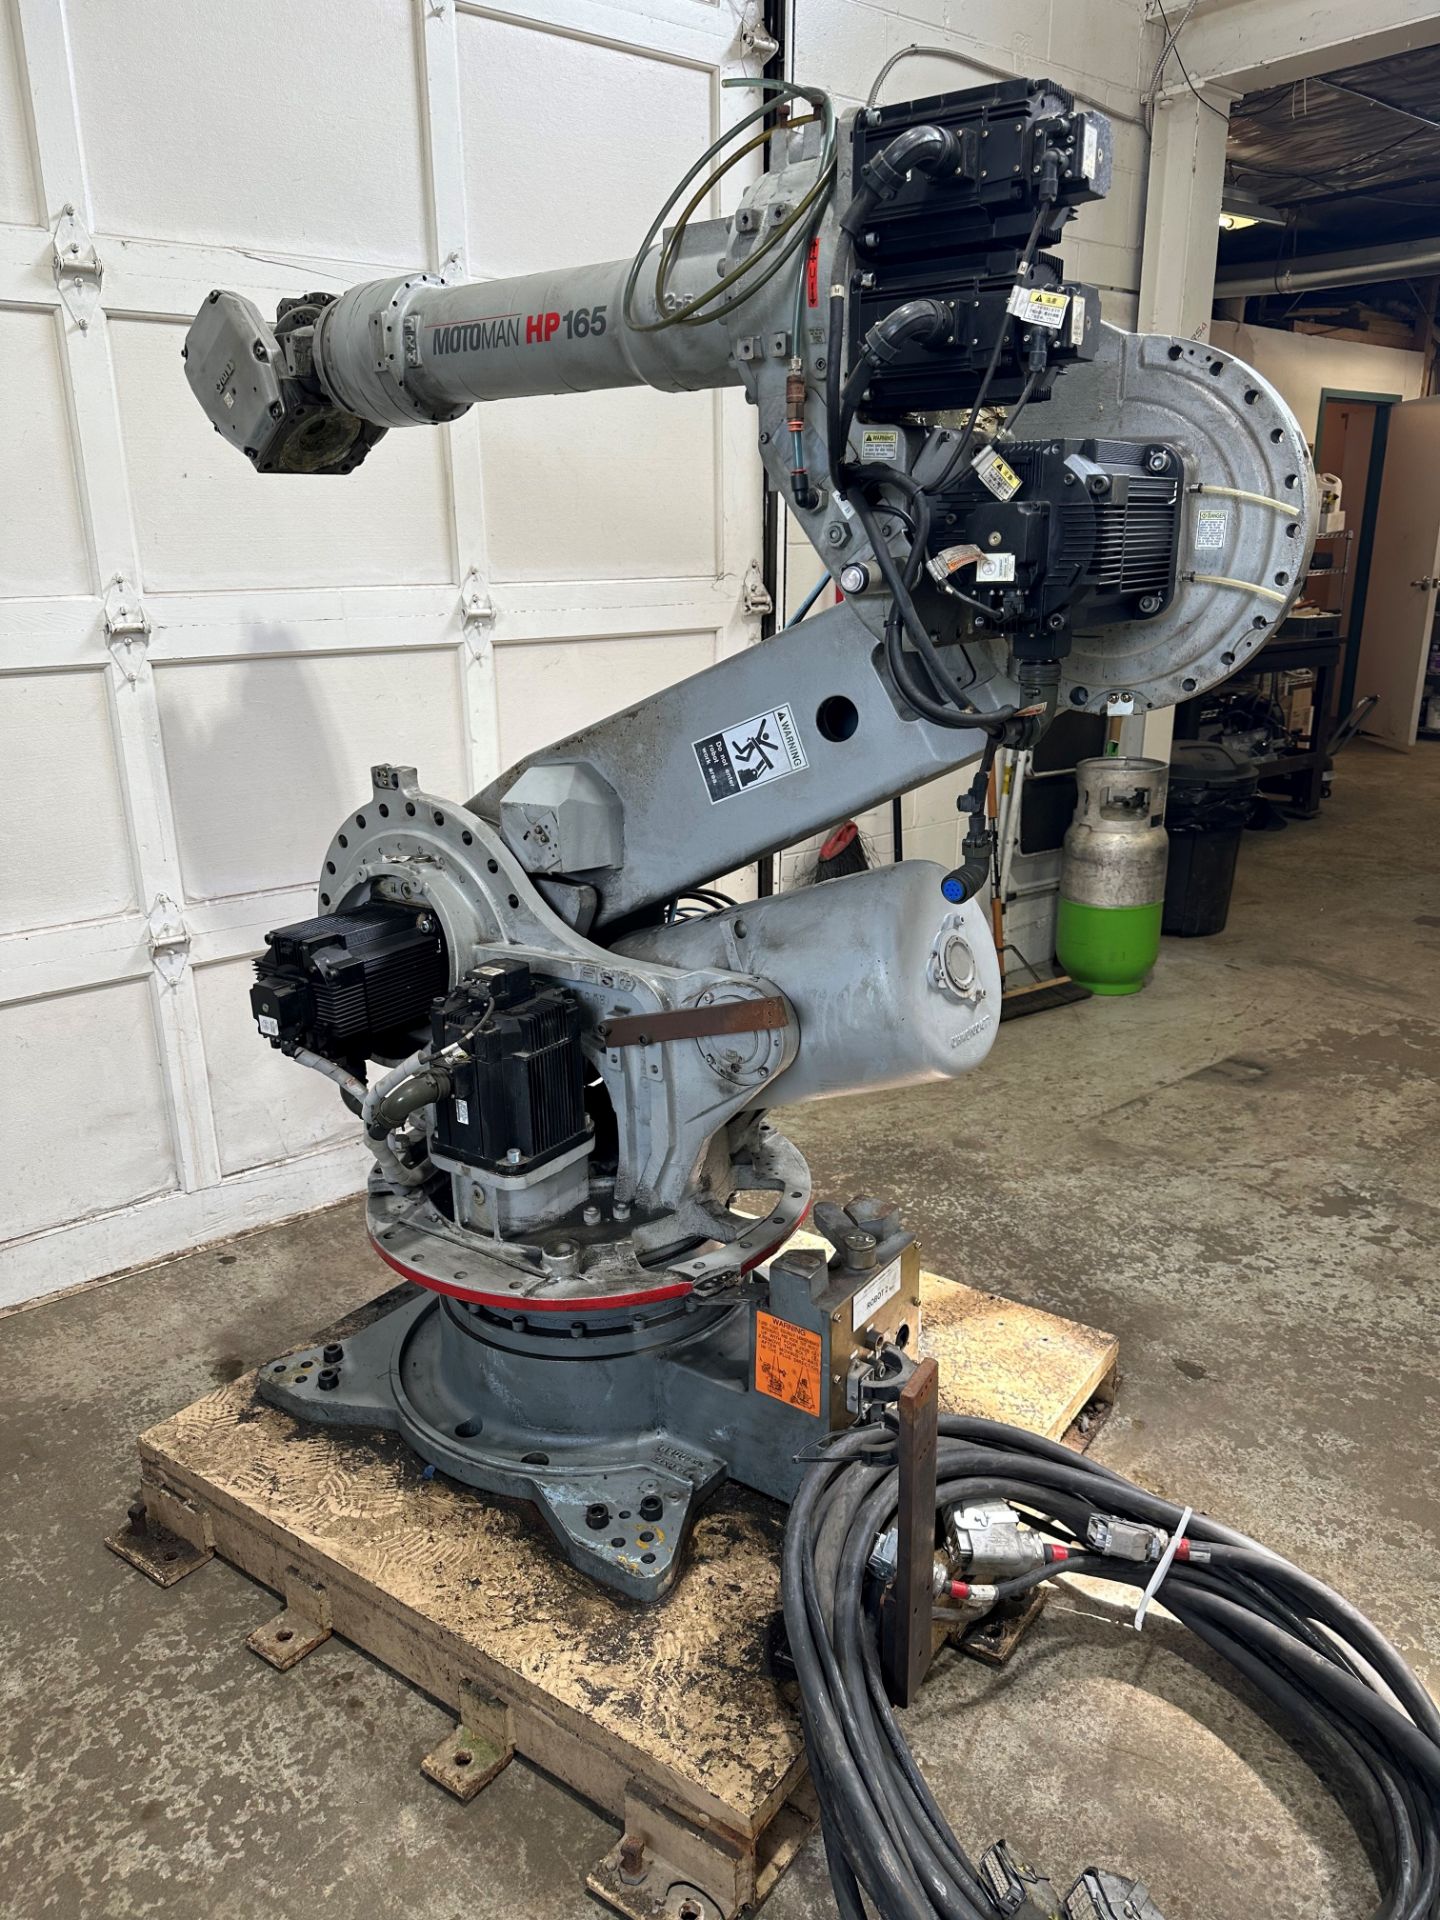 2005 MOTOMAN HP165 ROBOT, TYPE YR-HP165-A00, 165KG PAYLOAD W/ CABLES (ROBOT ARM ONLY) (LOCATED IN